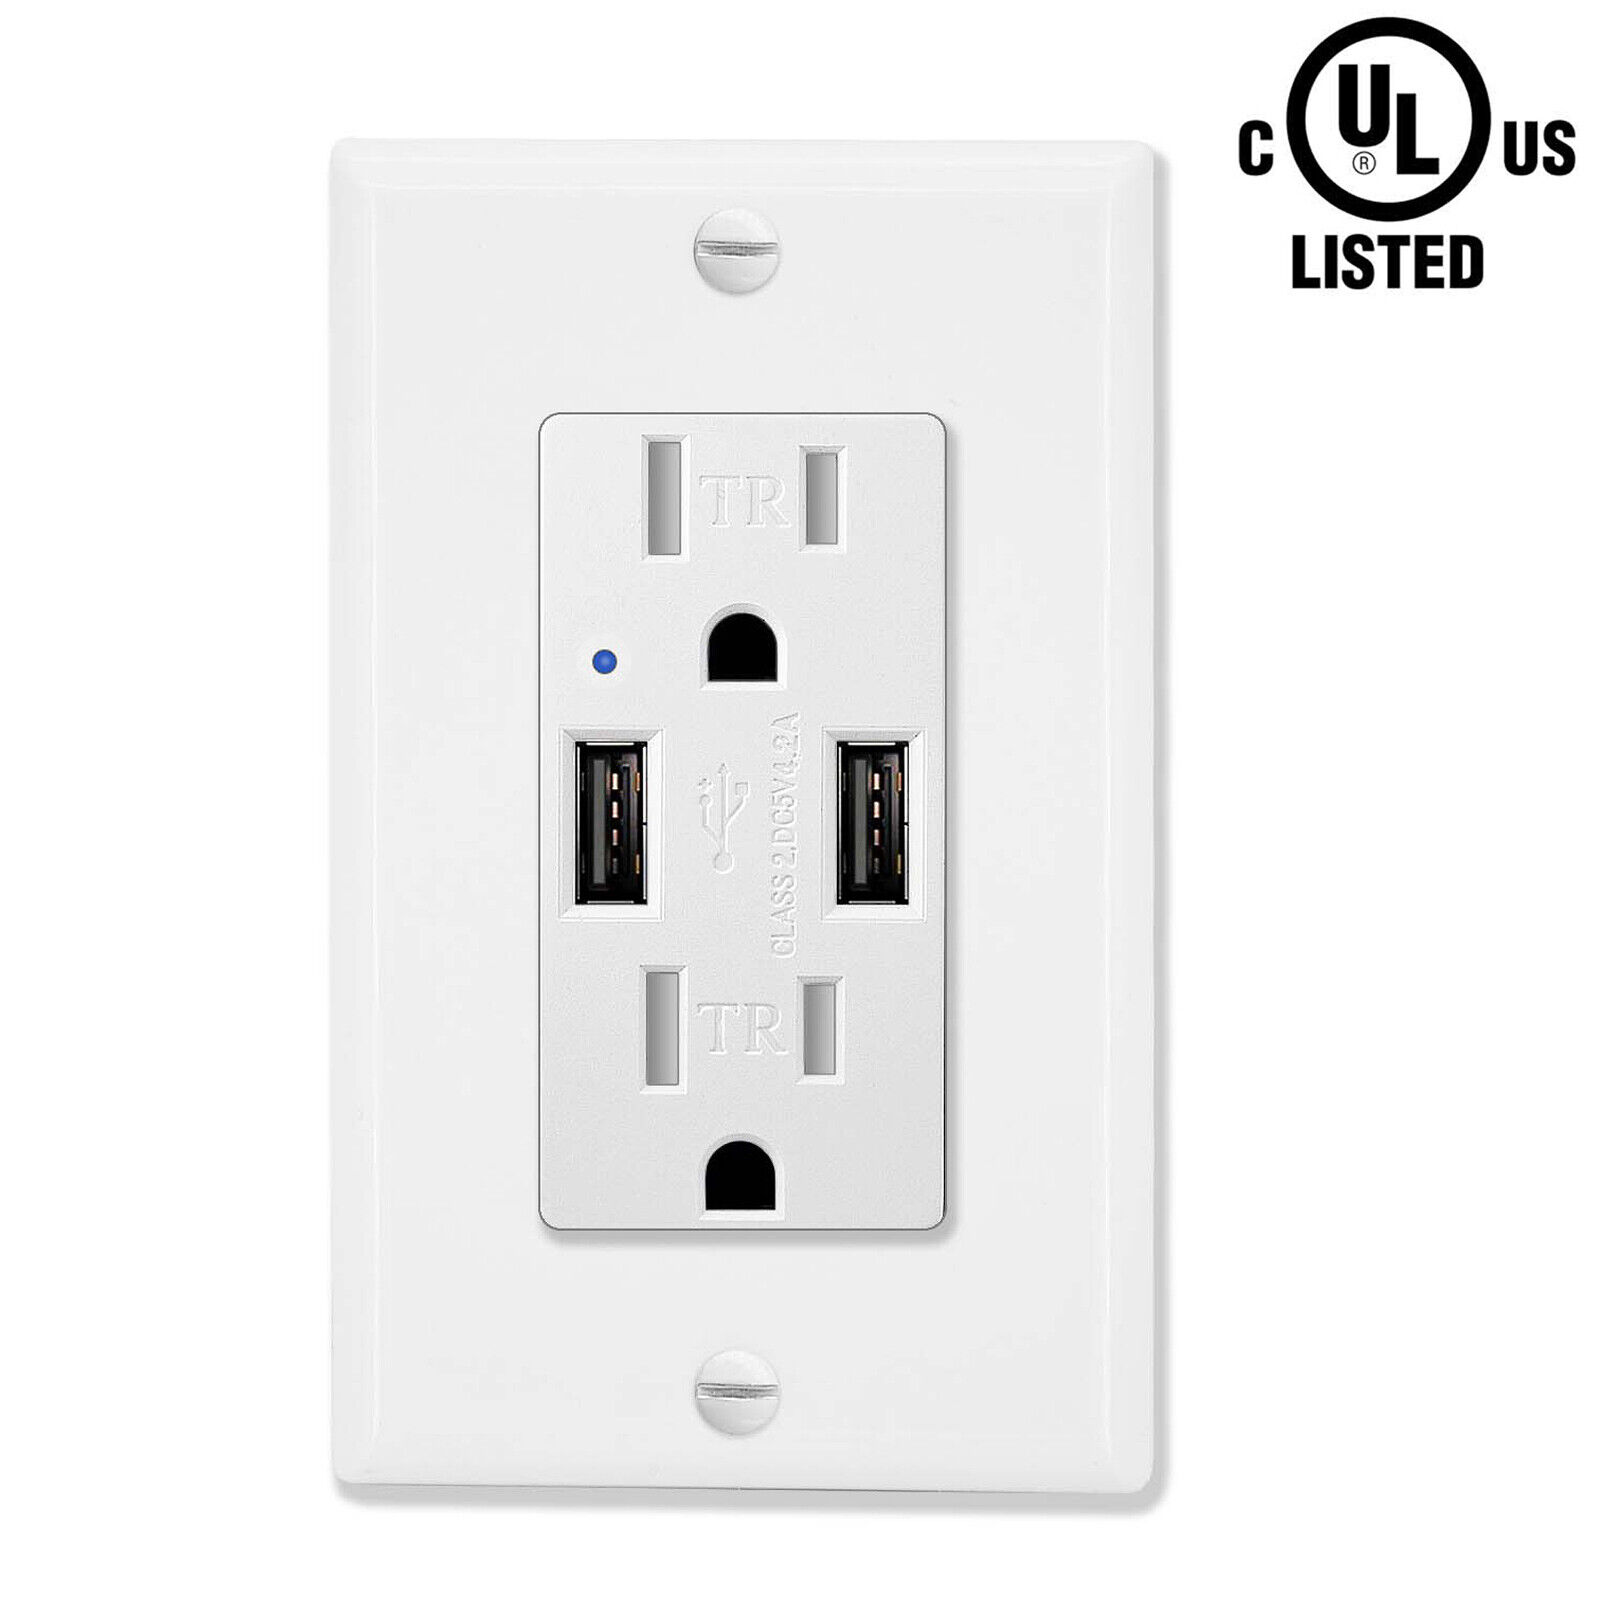 4.2A Dual USB Port Wall Outlet Socket Power Charger Receptacle w/ Plate TR UL